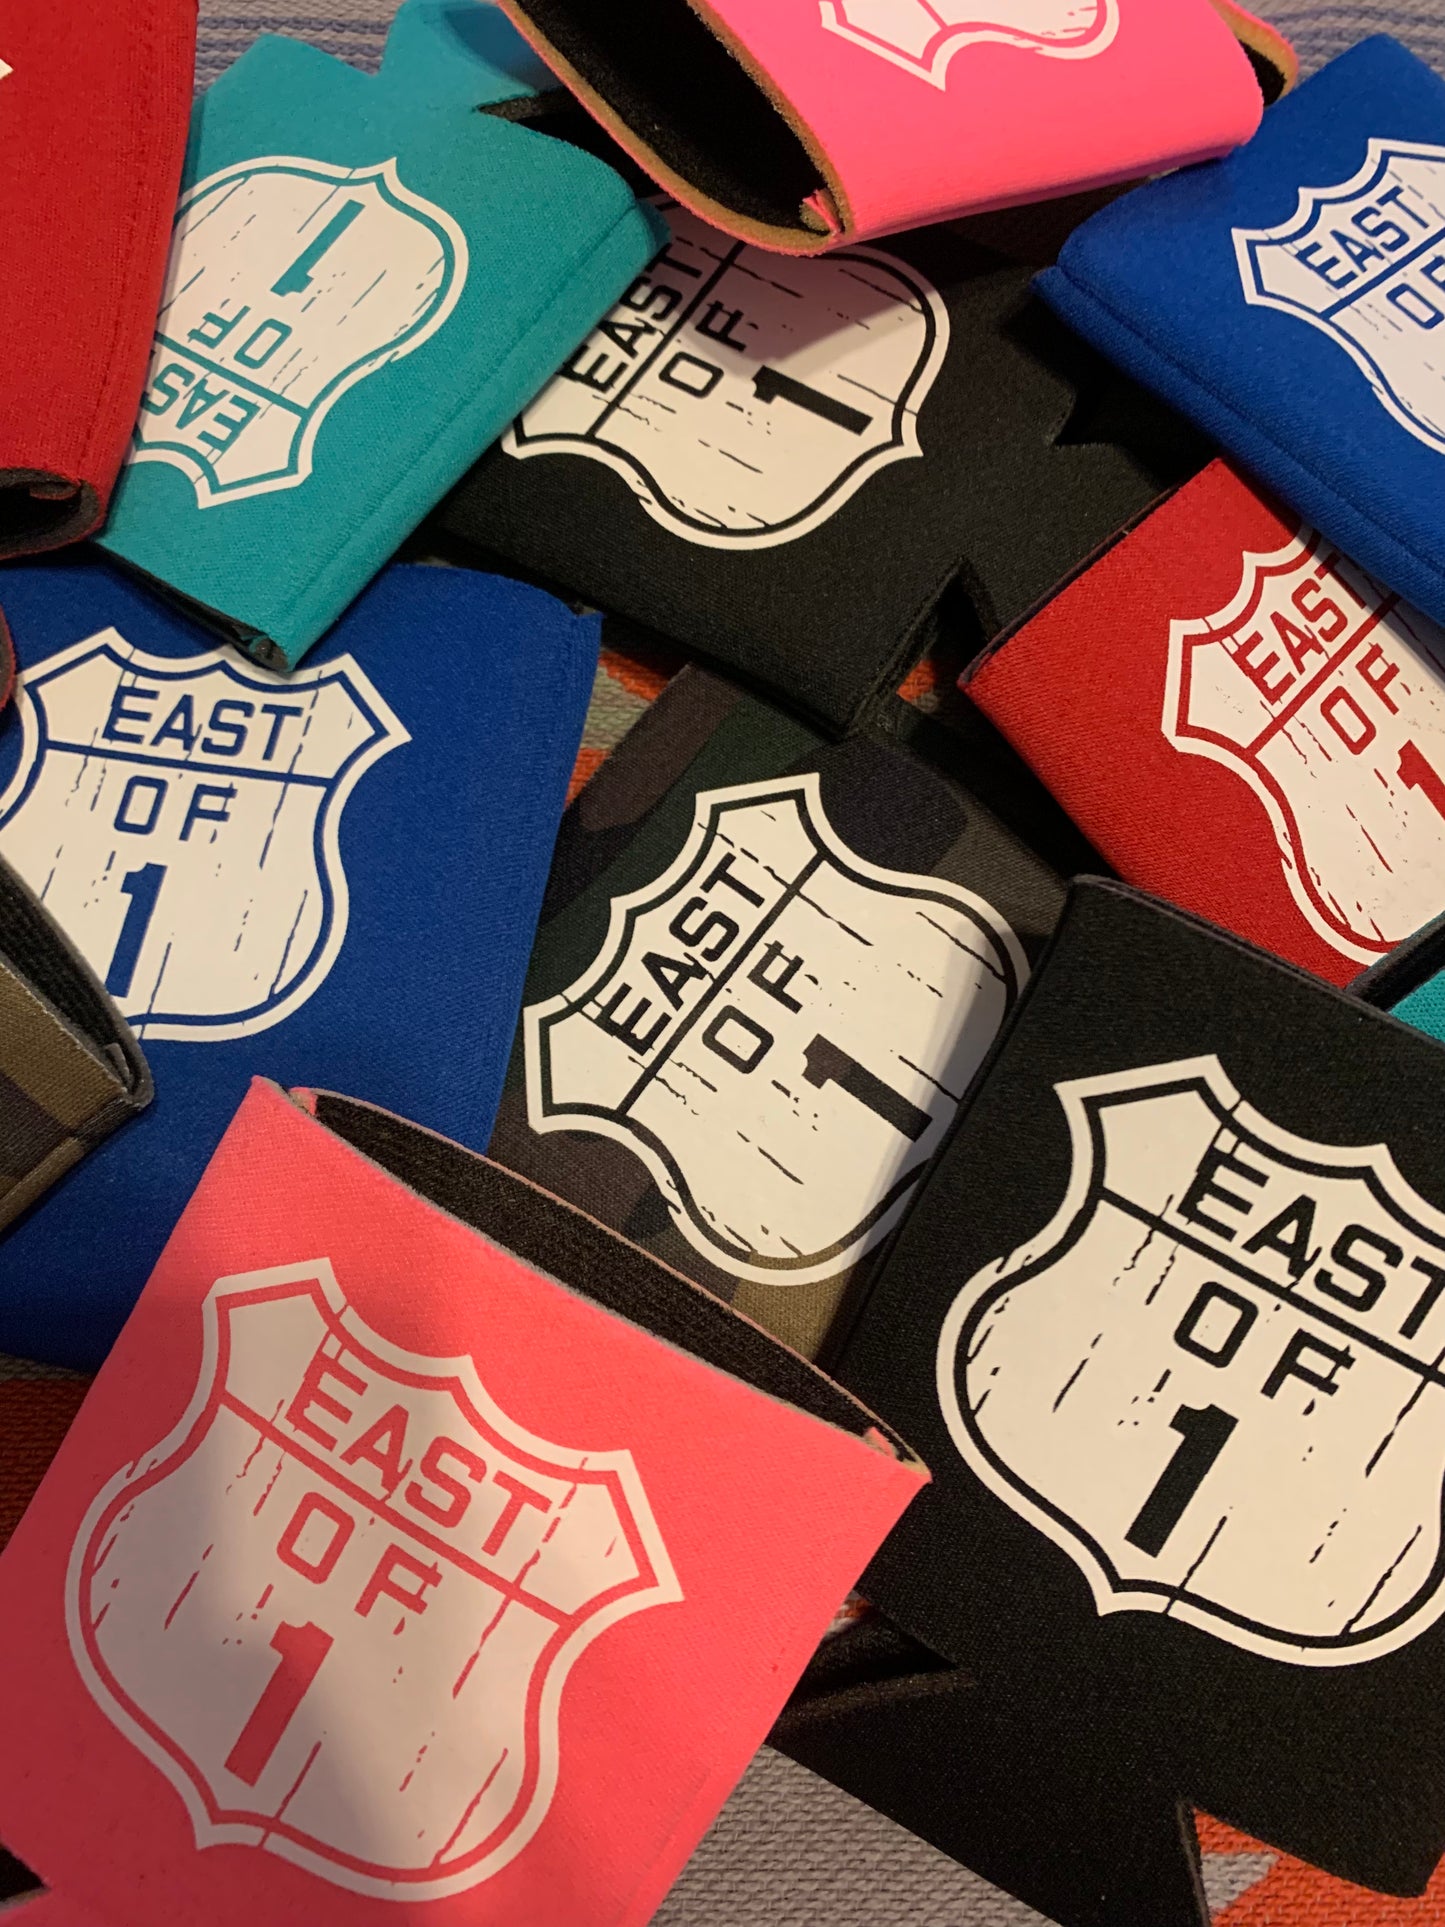 Koozies 3 for $10